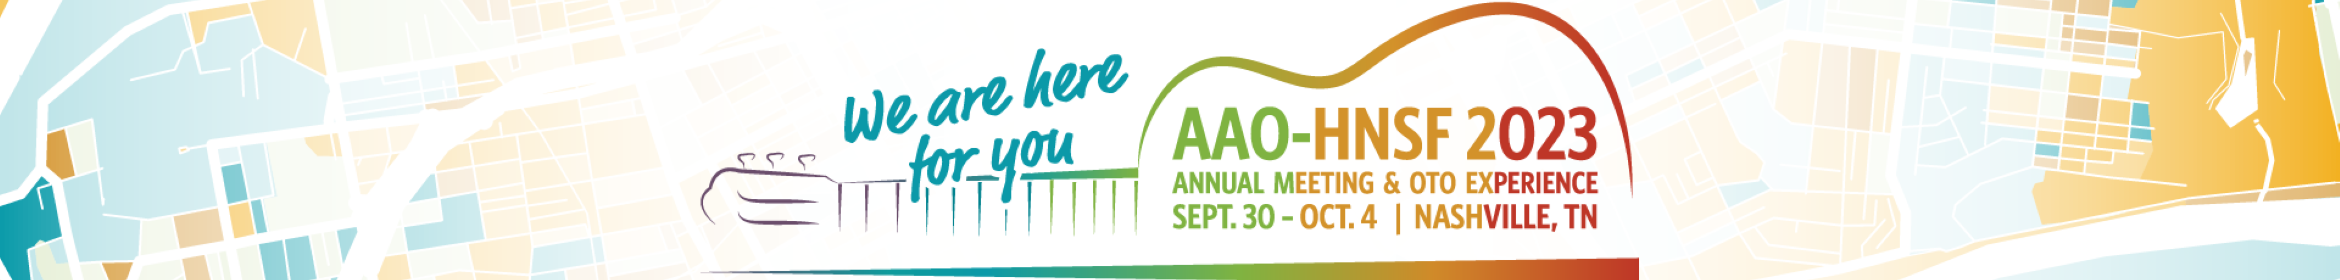 AAO-HNSF 2023 Annual Meeting & OTO Experience Main banner